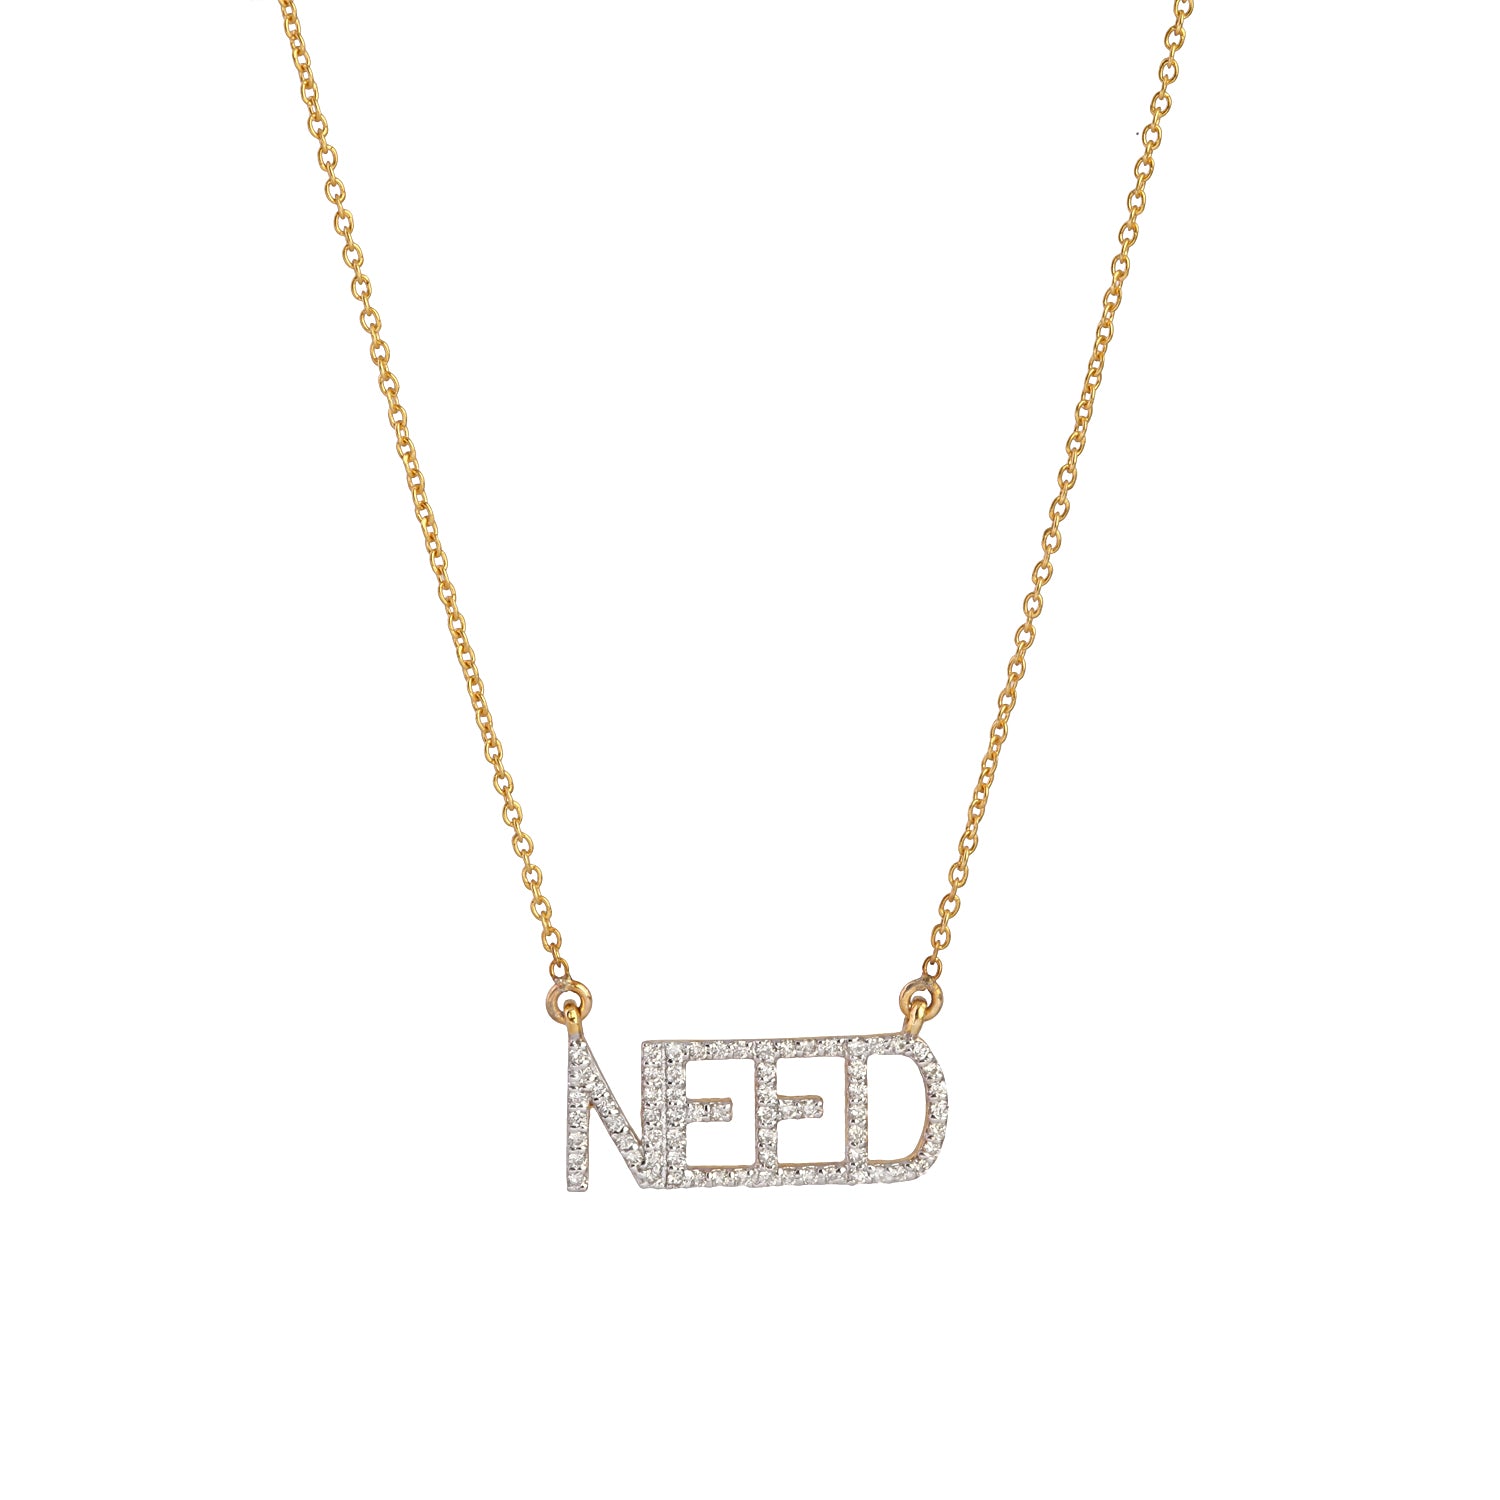 NEED Designer 14k Yellow Gold Necklace